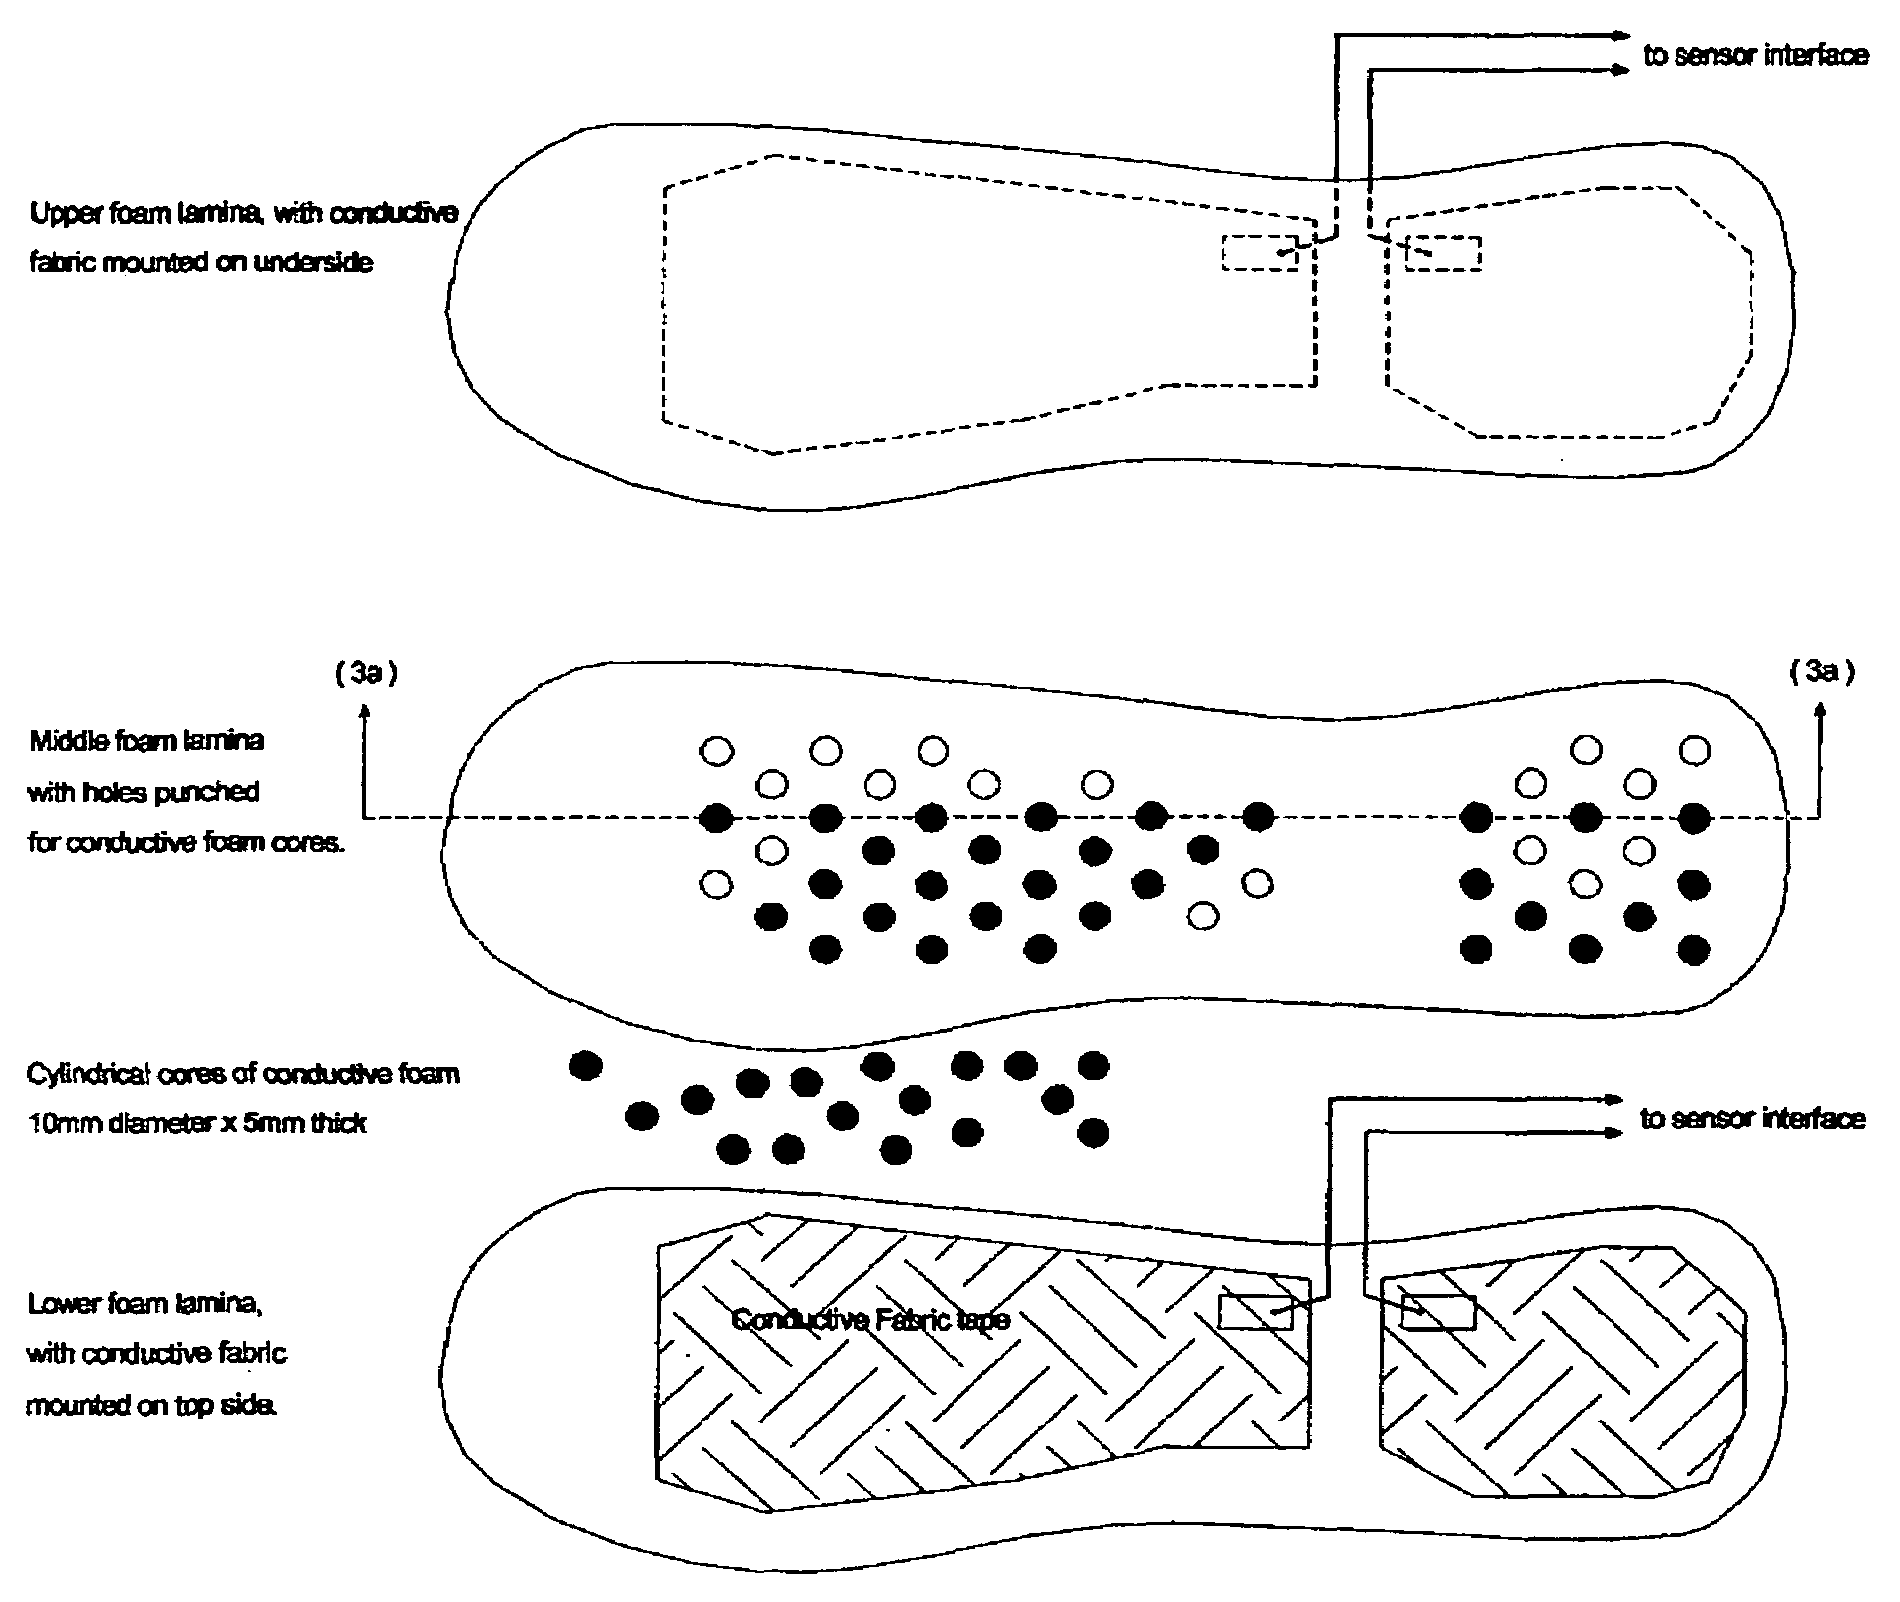 System incorporating an insole pressure sensor and personal annunciator for use in gait assistive therapy